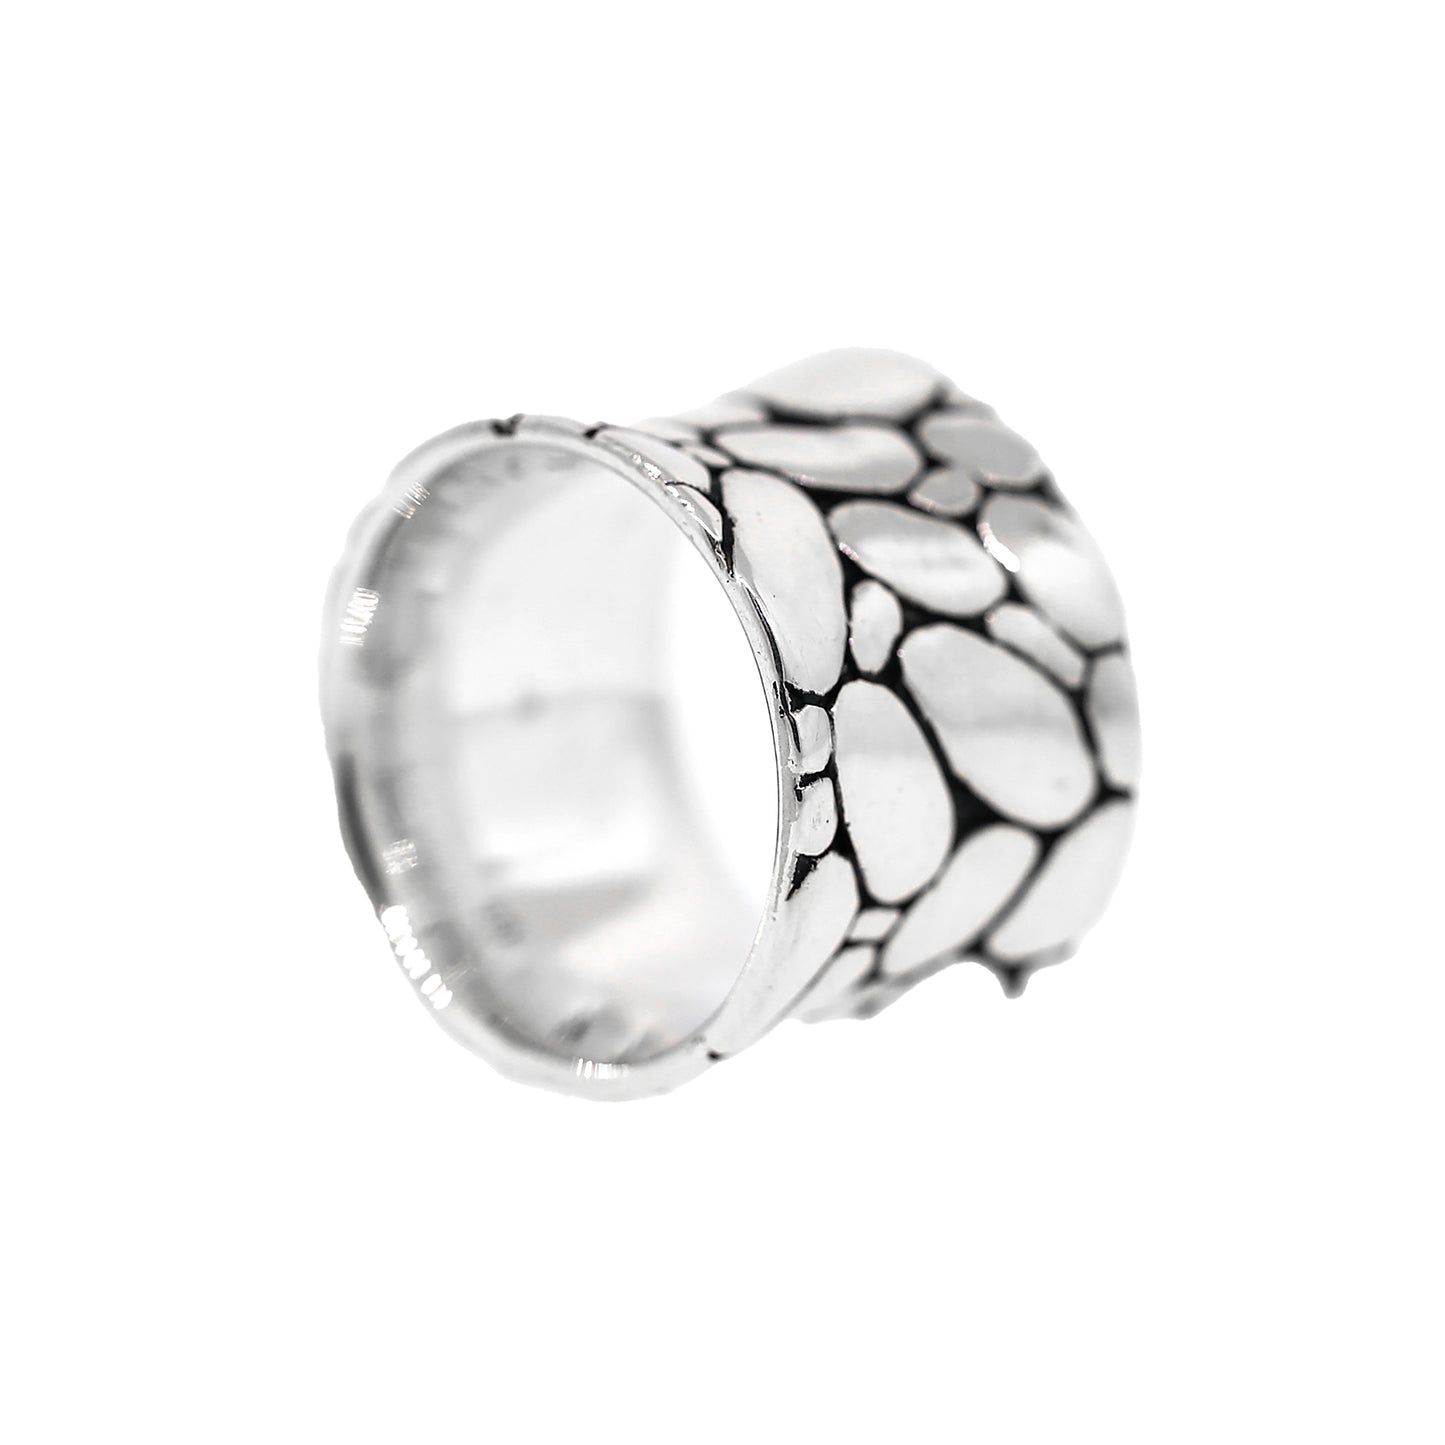 Load image into Gallery viewer, John Hardy Kali Band Ring in Sterling Silver
